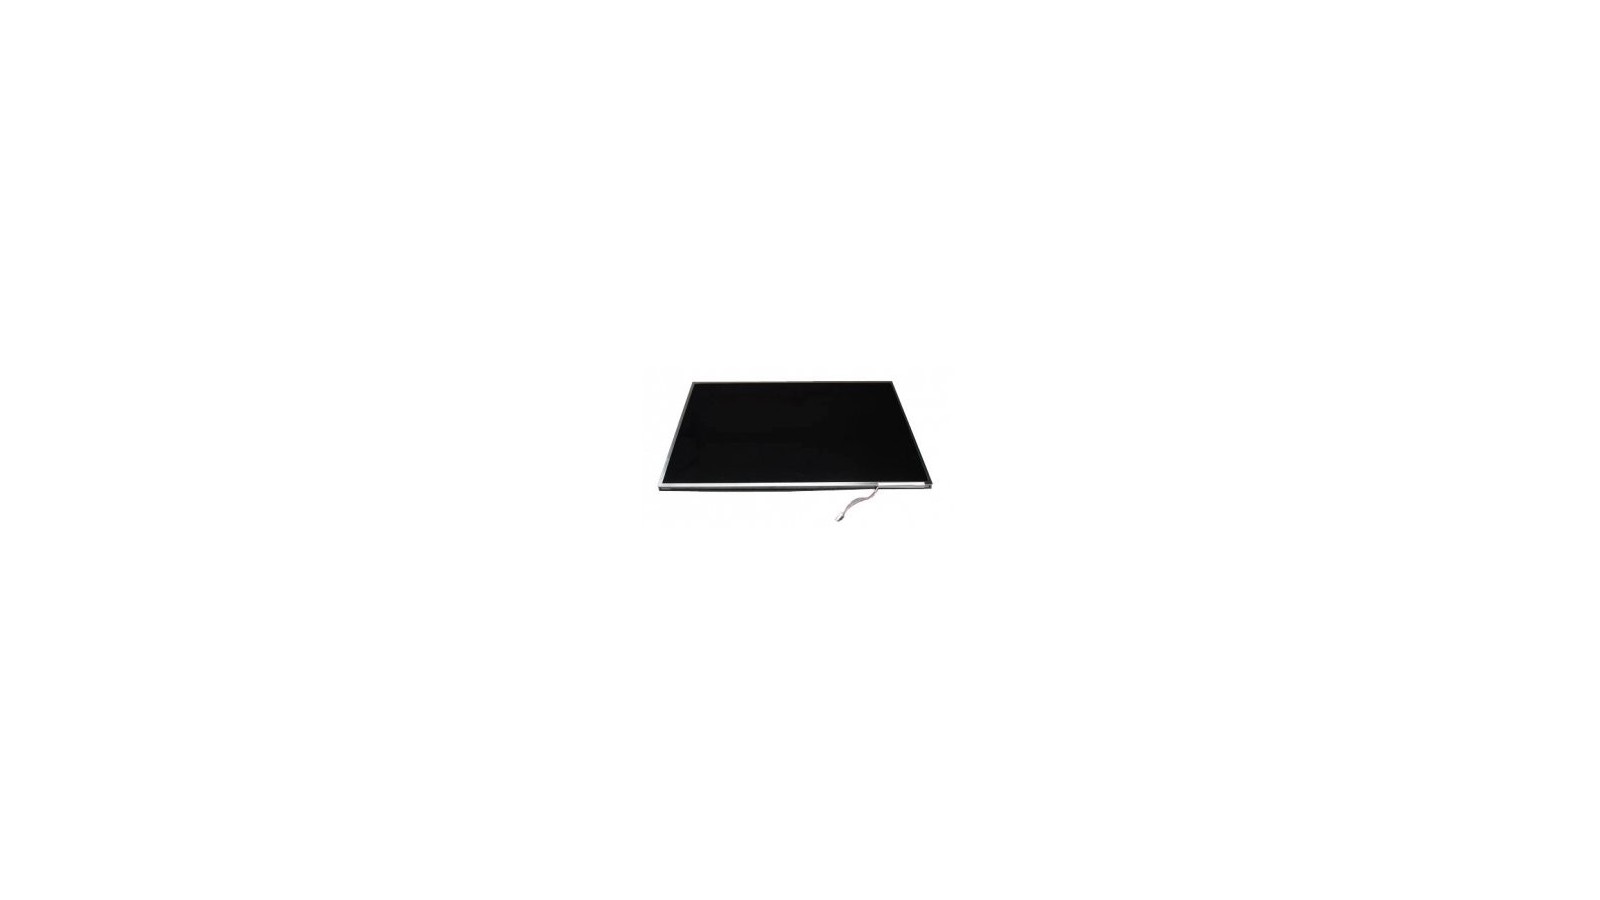 Sostituzione display 17" Sony Vaio VGN-A170P VGN-A190